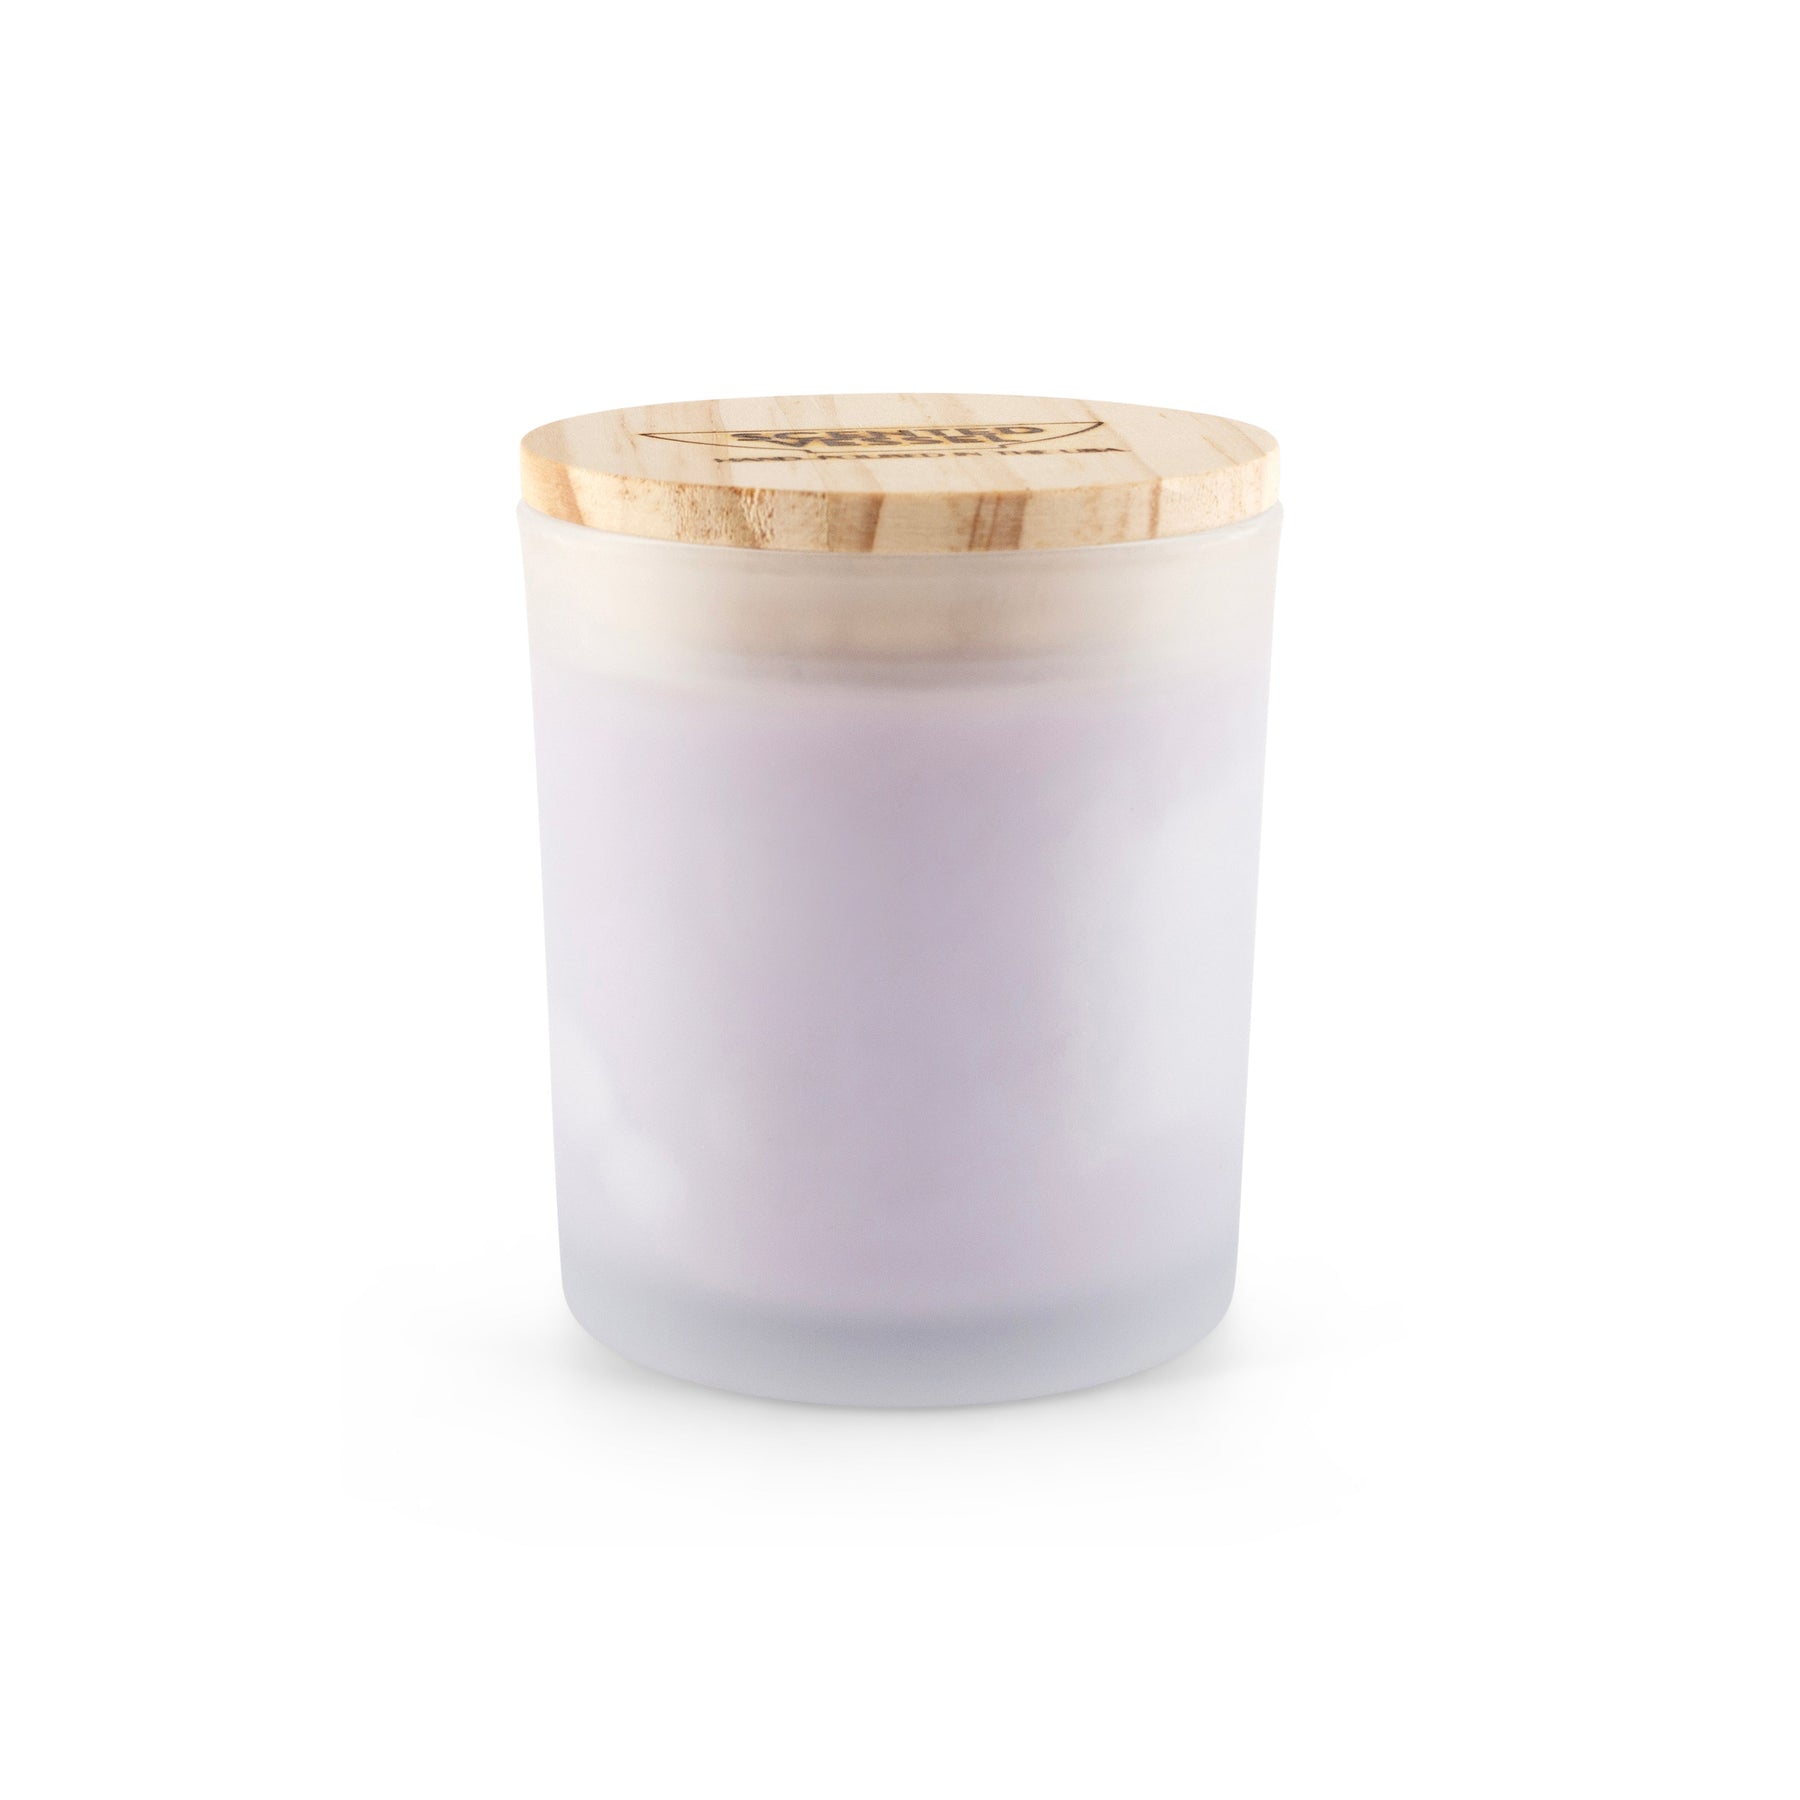 Lilac Blossom 7.5oz Soy Wax Blend Candle by Scented Vessel